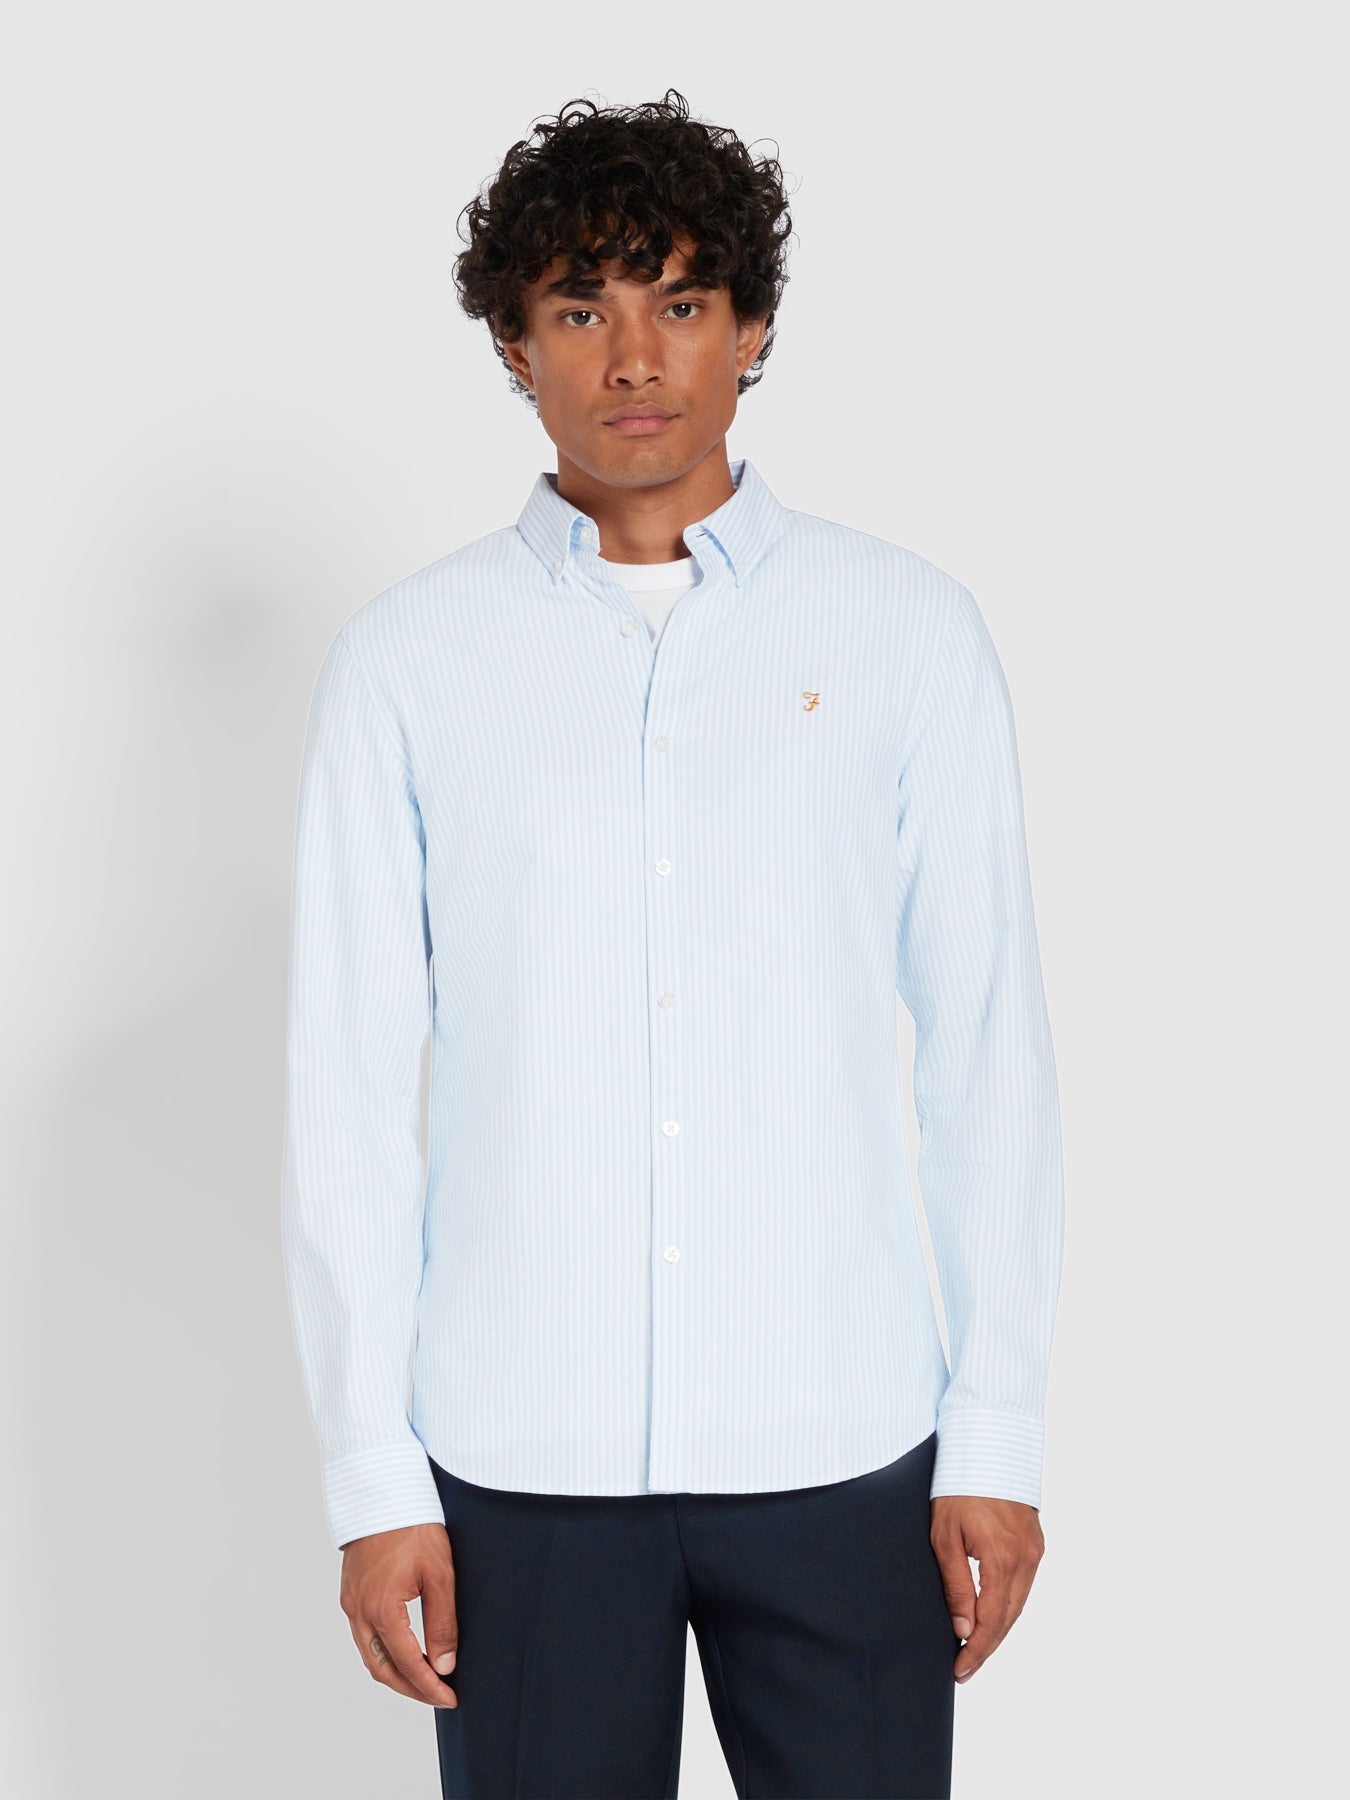 View Brewer Slim Fit Striped Organic Cotton Oxford Shirt In Sky Blue information